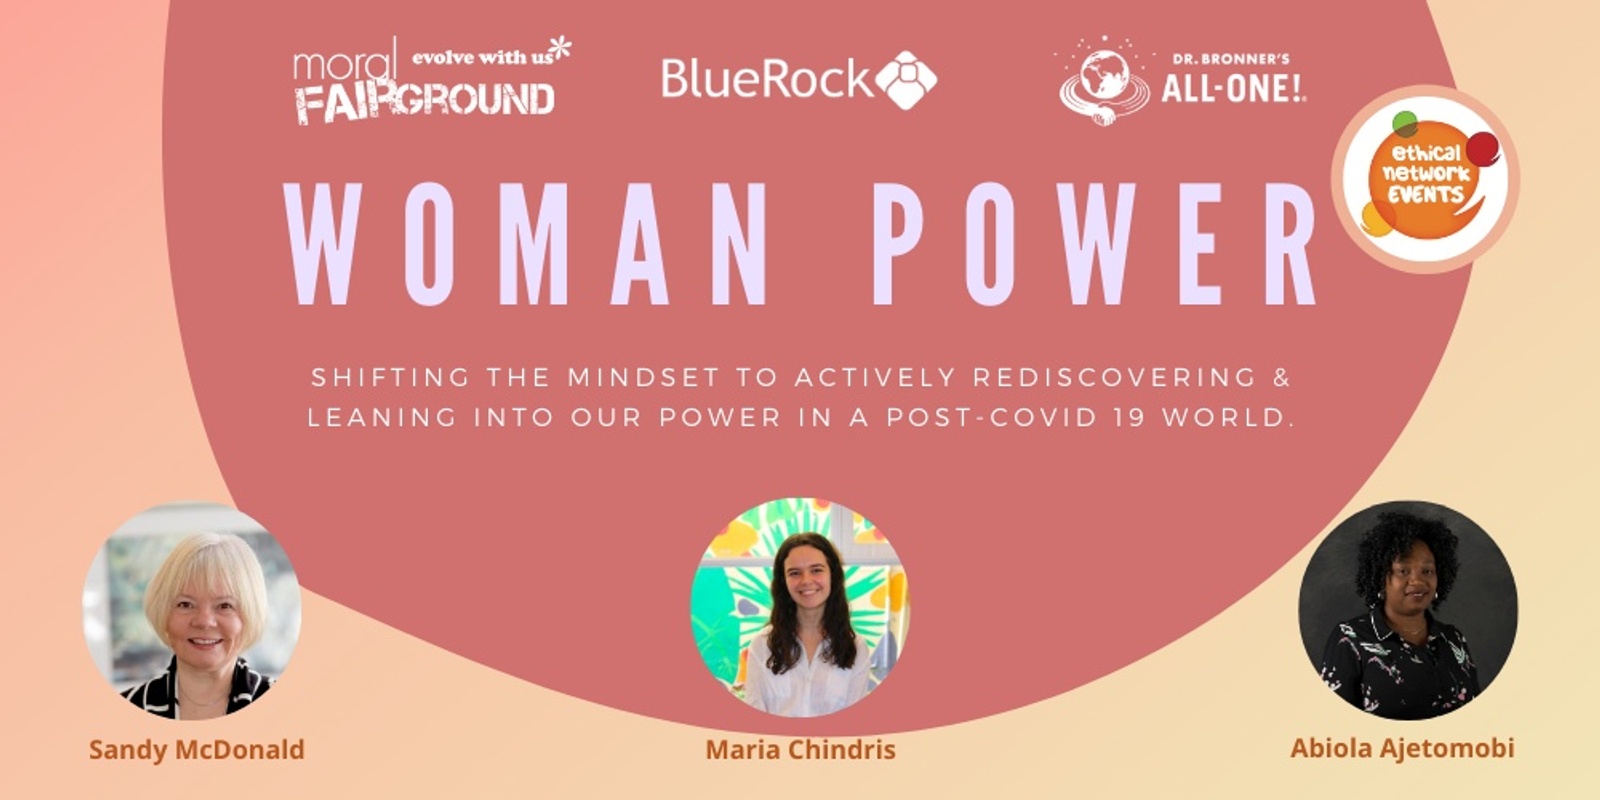 Banner image for Woman Power: Woman Power: Shifting the mindset to actively rediscover & lean into our power in a post-COVID 19 world.